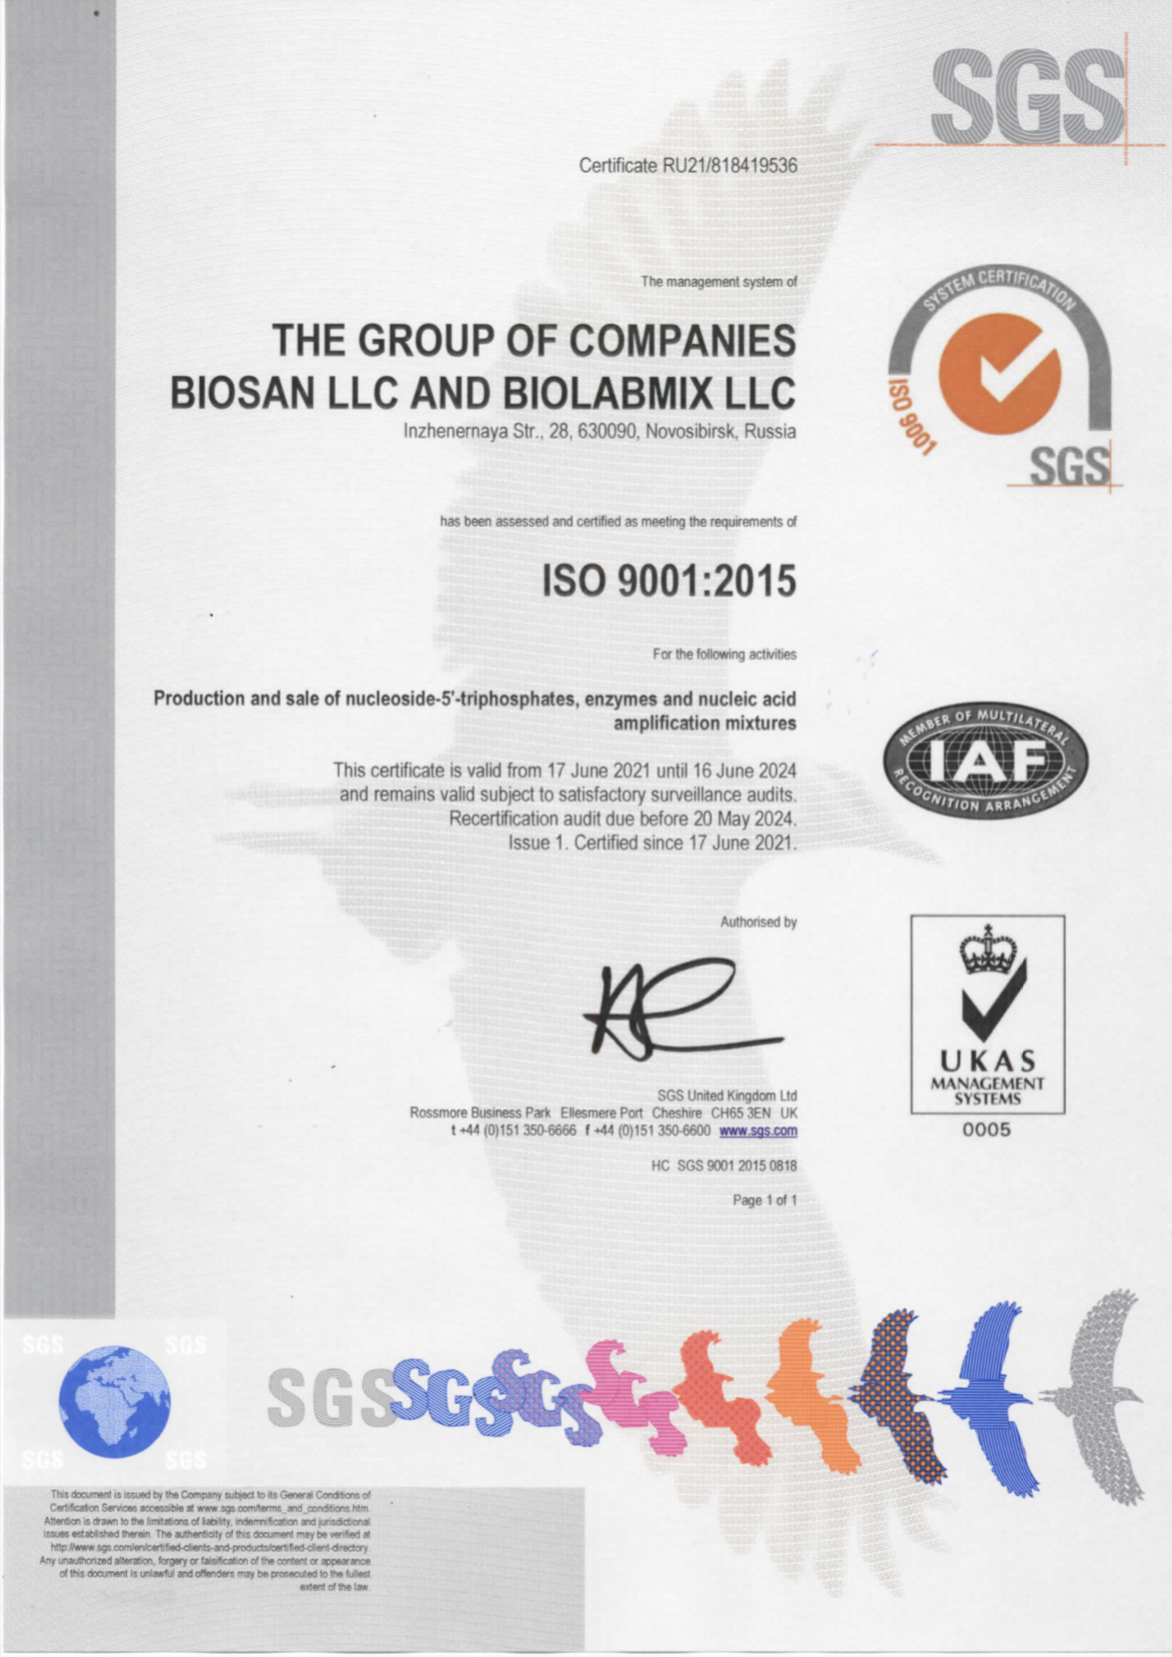 BIOSAN LLC and BIOLABMIX LLC has been assessed and certified as meeting the requirements of ISO 9001:2015